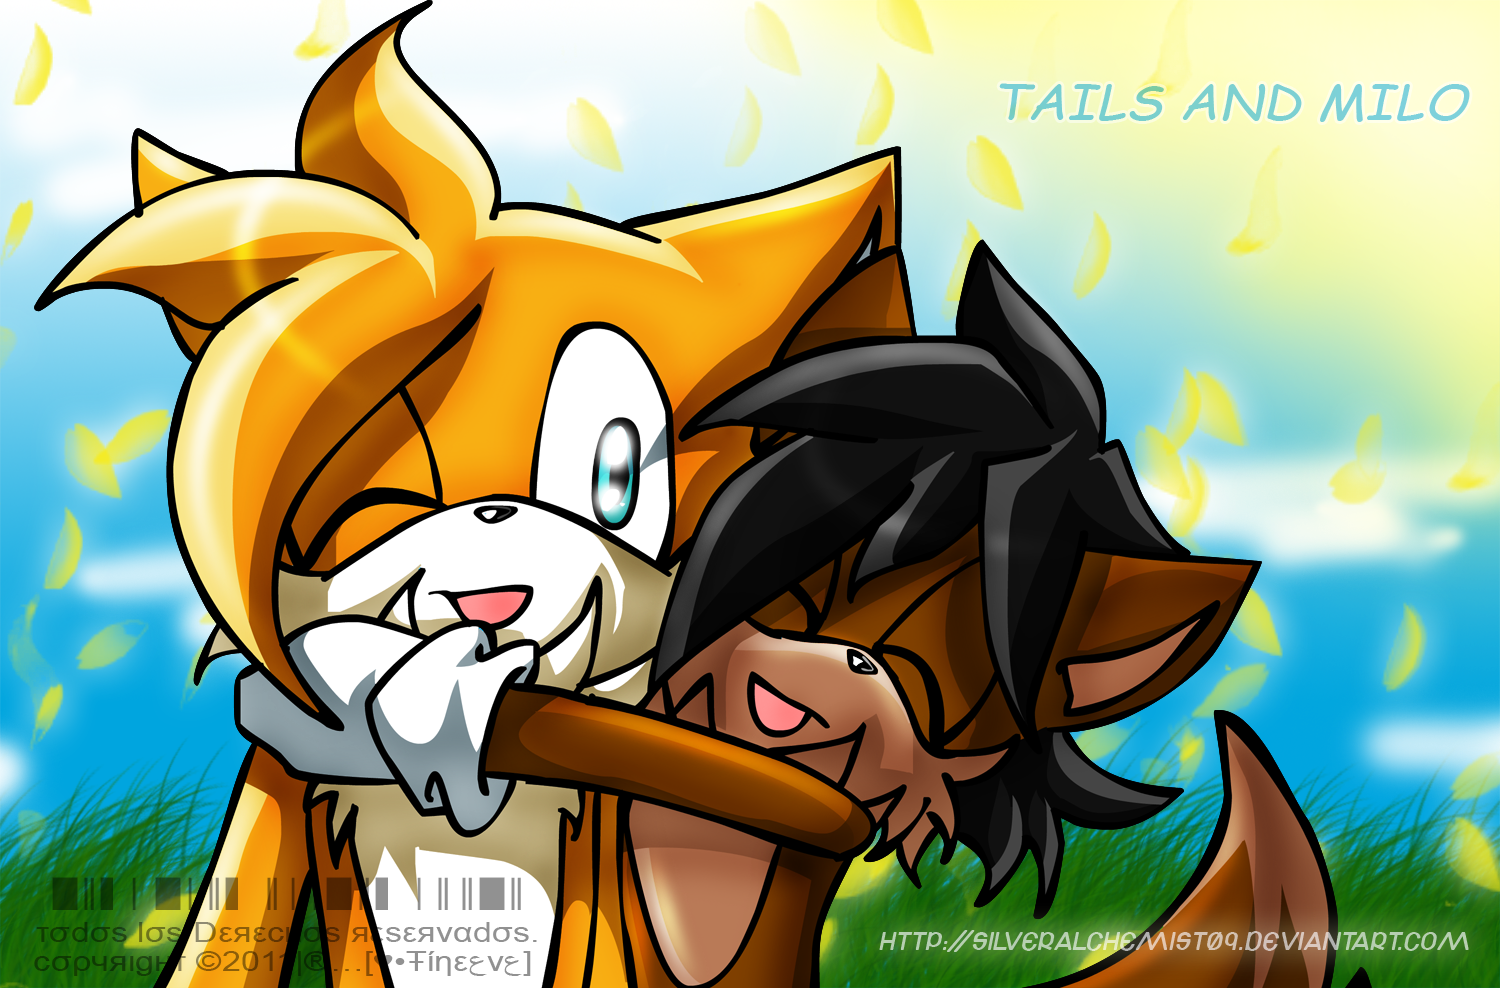 Rq - Milo and Tails